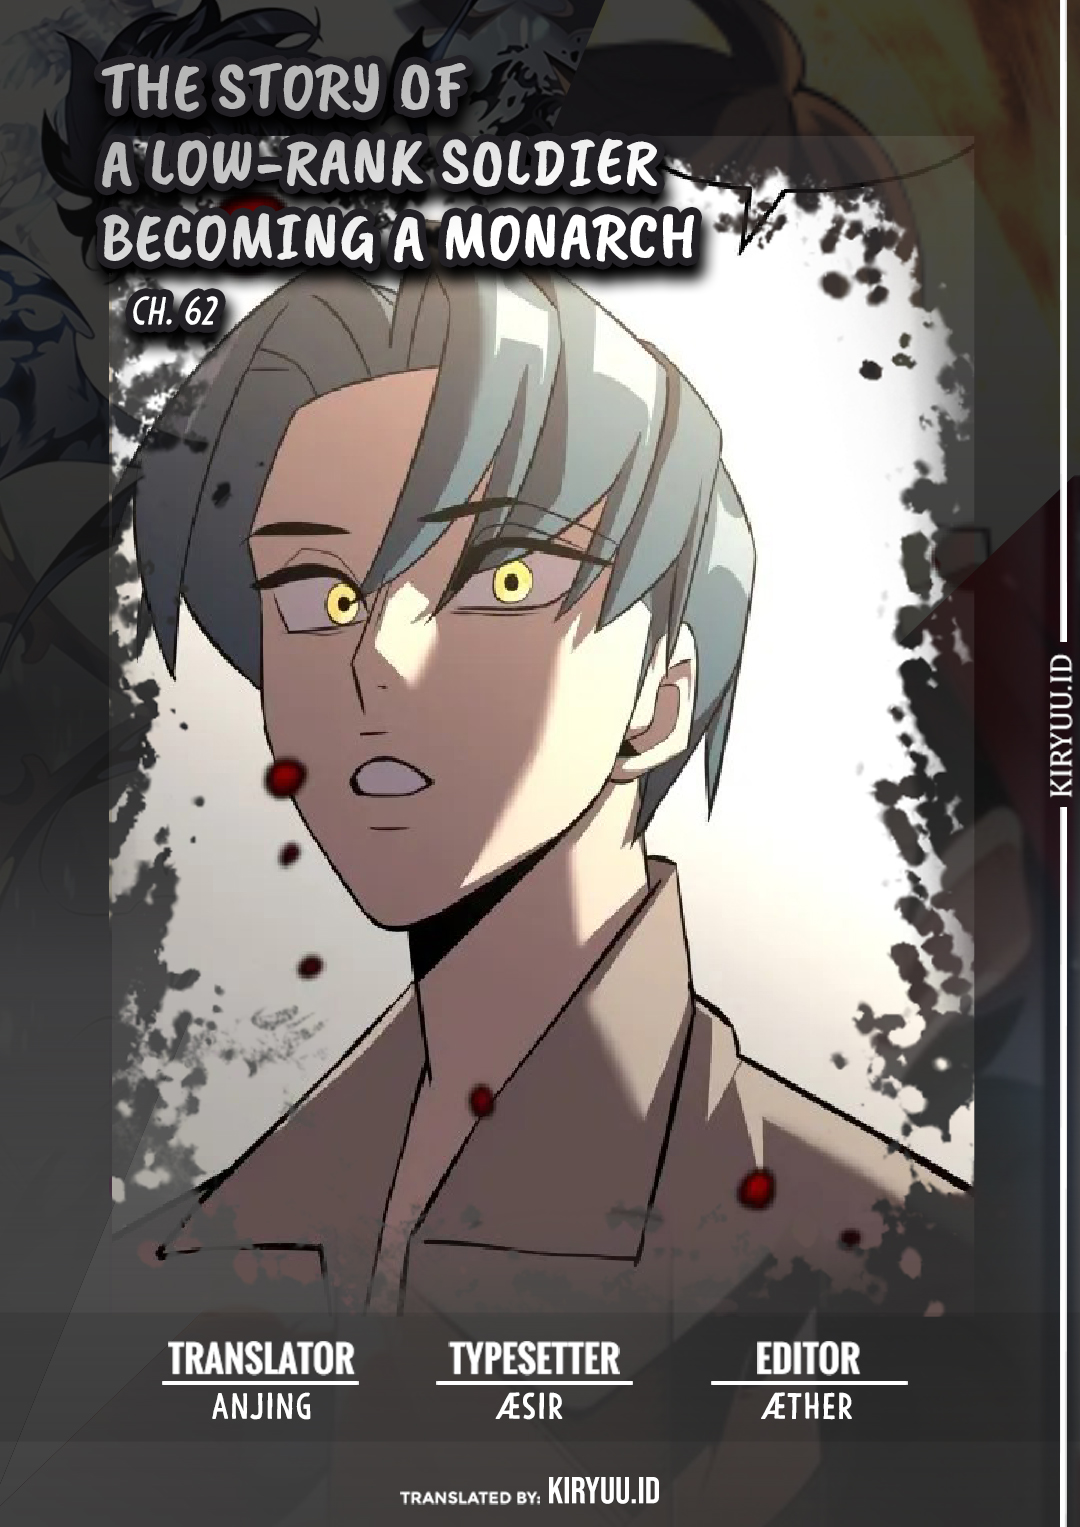 Baca Komik The Story of a Low-Rank Soldier Becoming a Monarch Chapter 62 Gambar 1